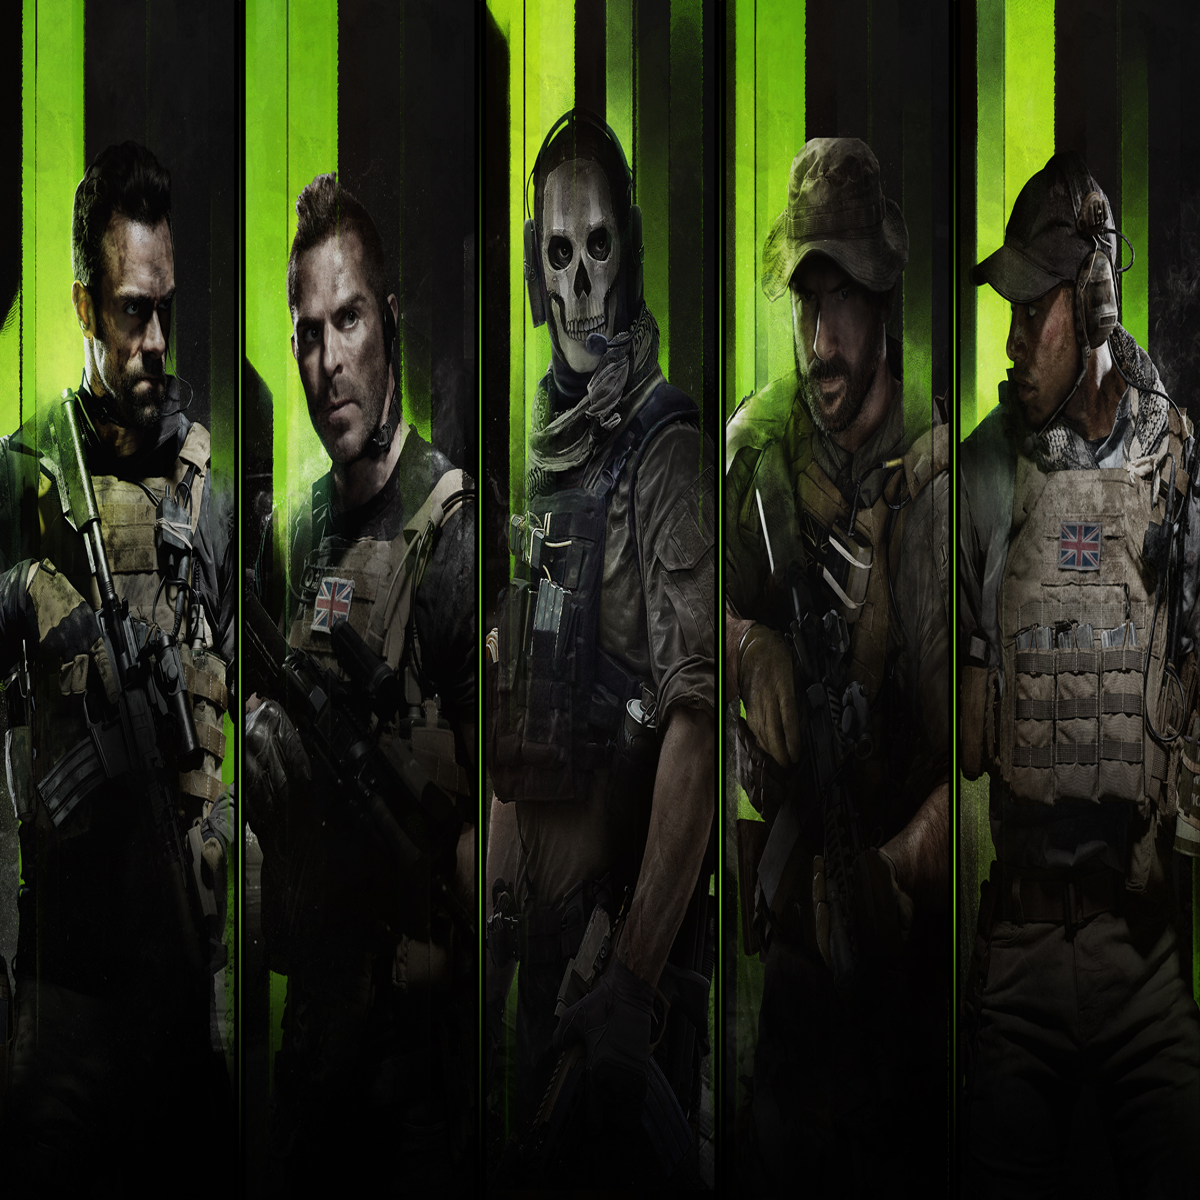 Call of Duty Modern Warfare 3 Campaign Review, Gameplay and